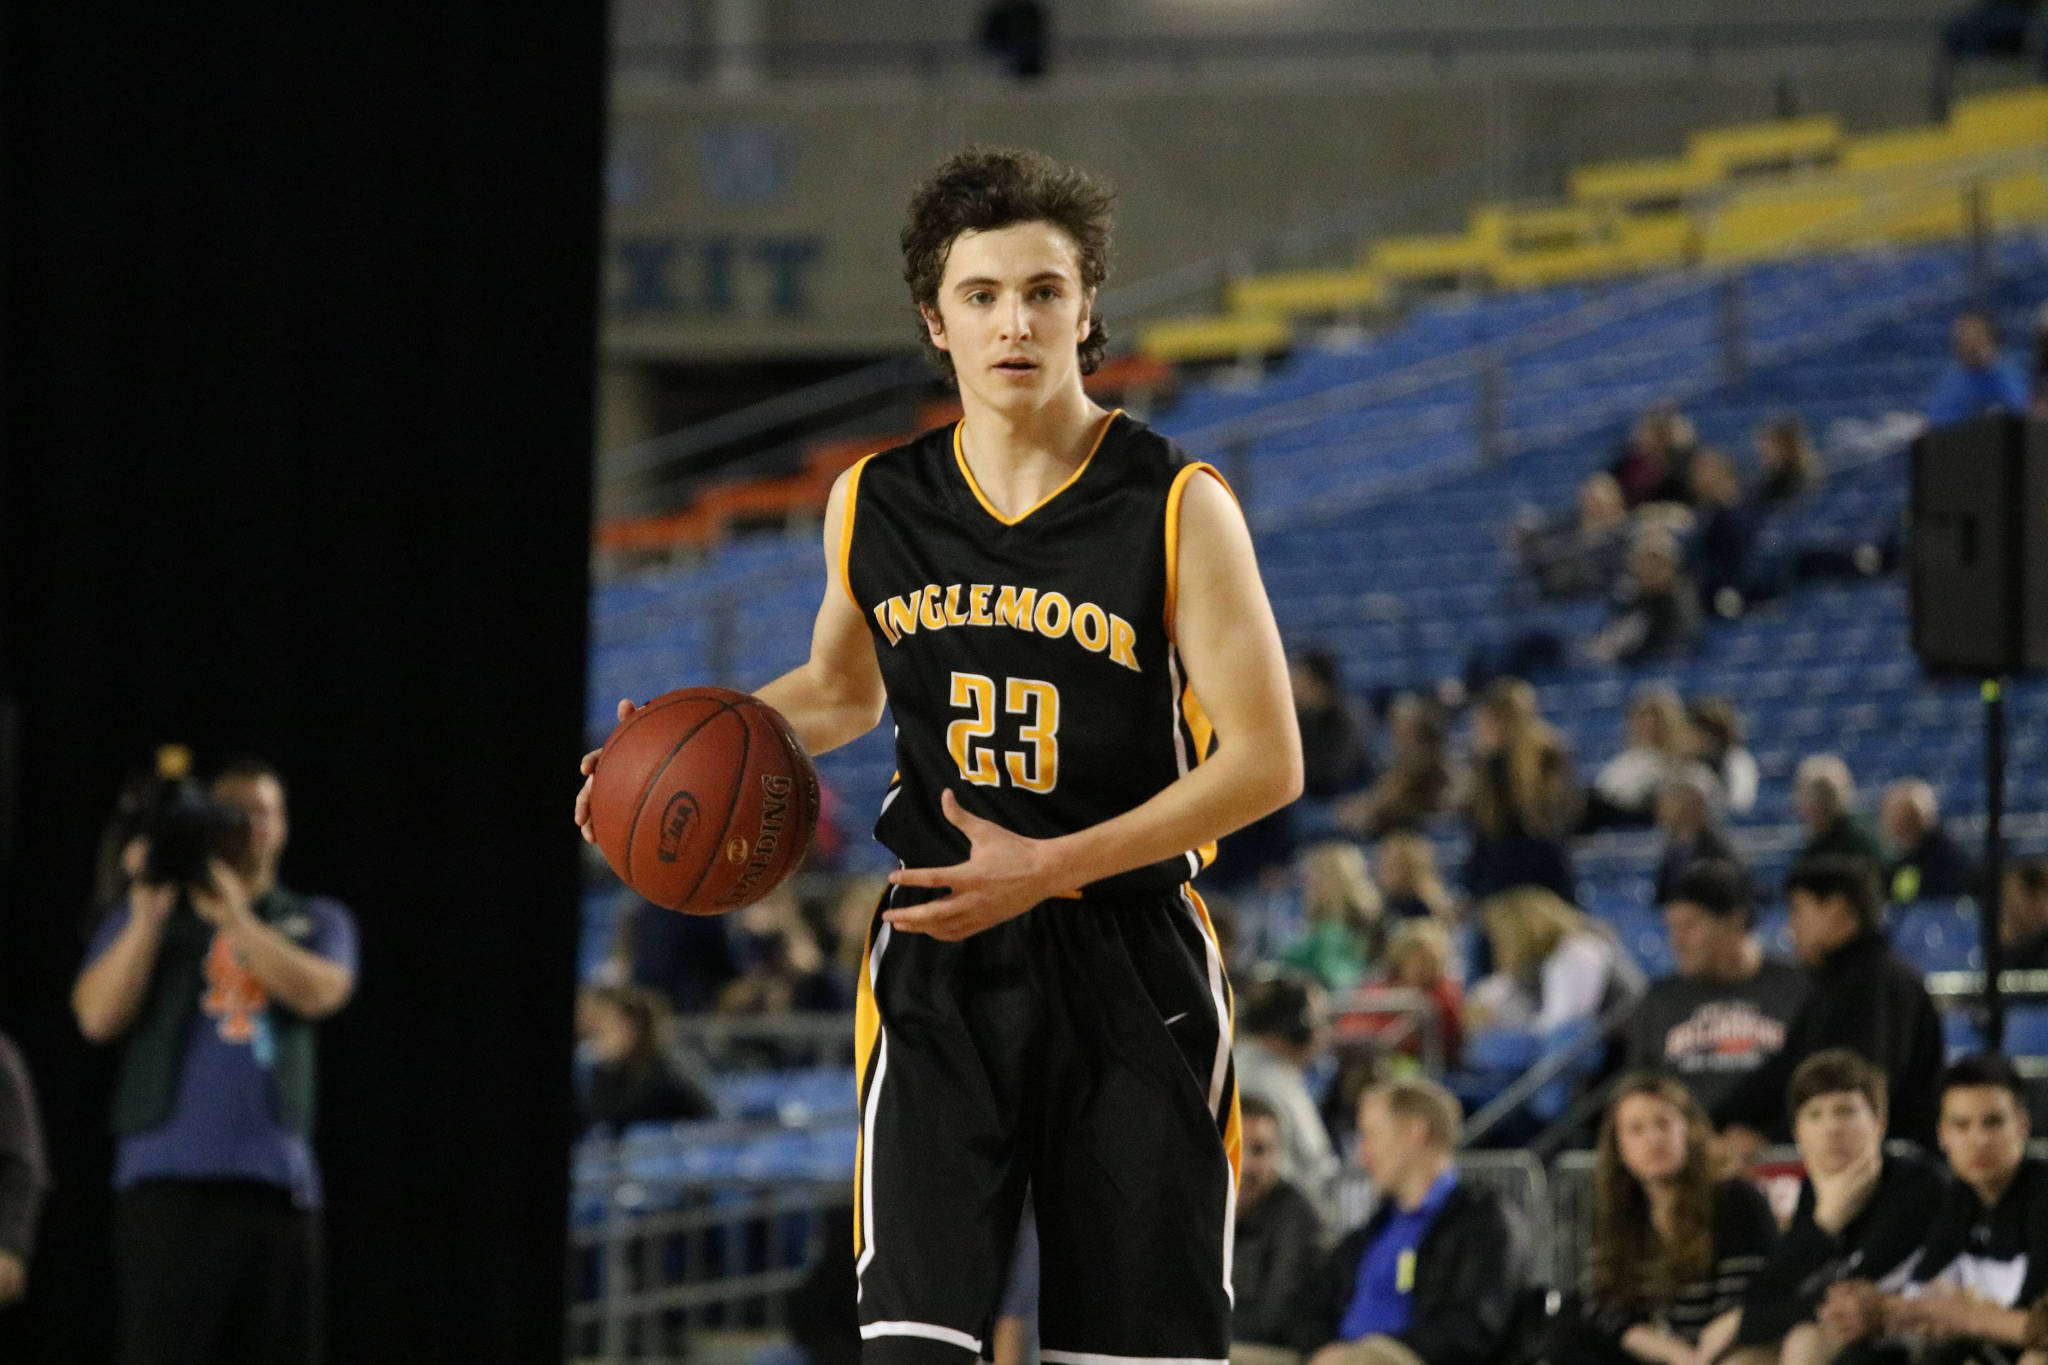 Inglemoor senior Ryan Hamilton brings the ball up in the first half of Wednesday’s loss to Enumclaw at the Hardwood Classic in Tacoma. JOHN WILLIAM HOWARD/Bothell-Kenmore Reporter